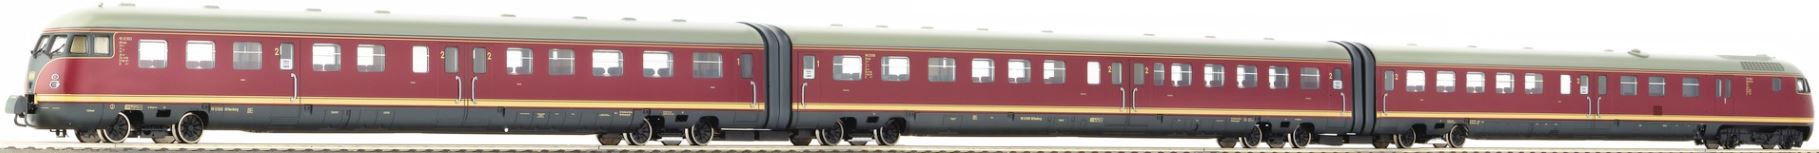 Roco 63131 H0 Diesel Multiple Unit Type VT 12.5, Ep III DB, With Sound